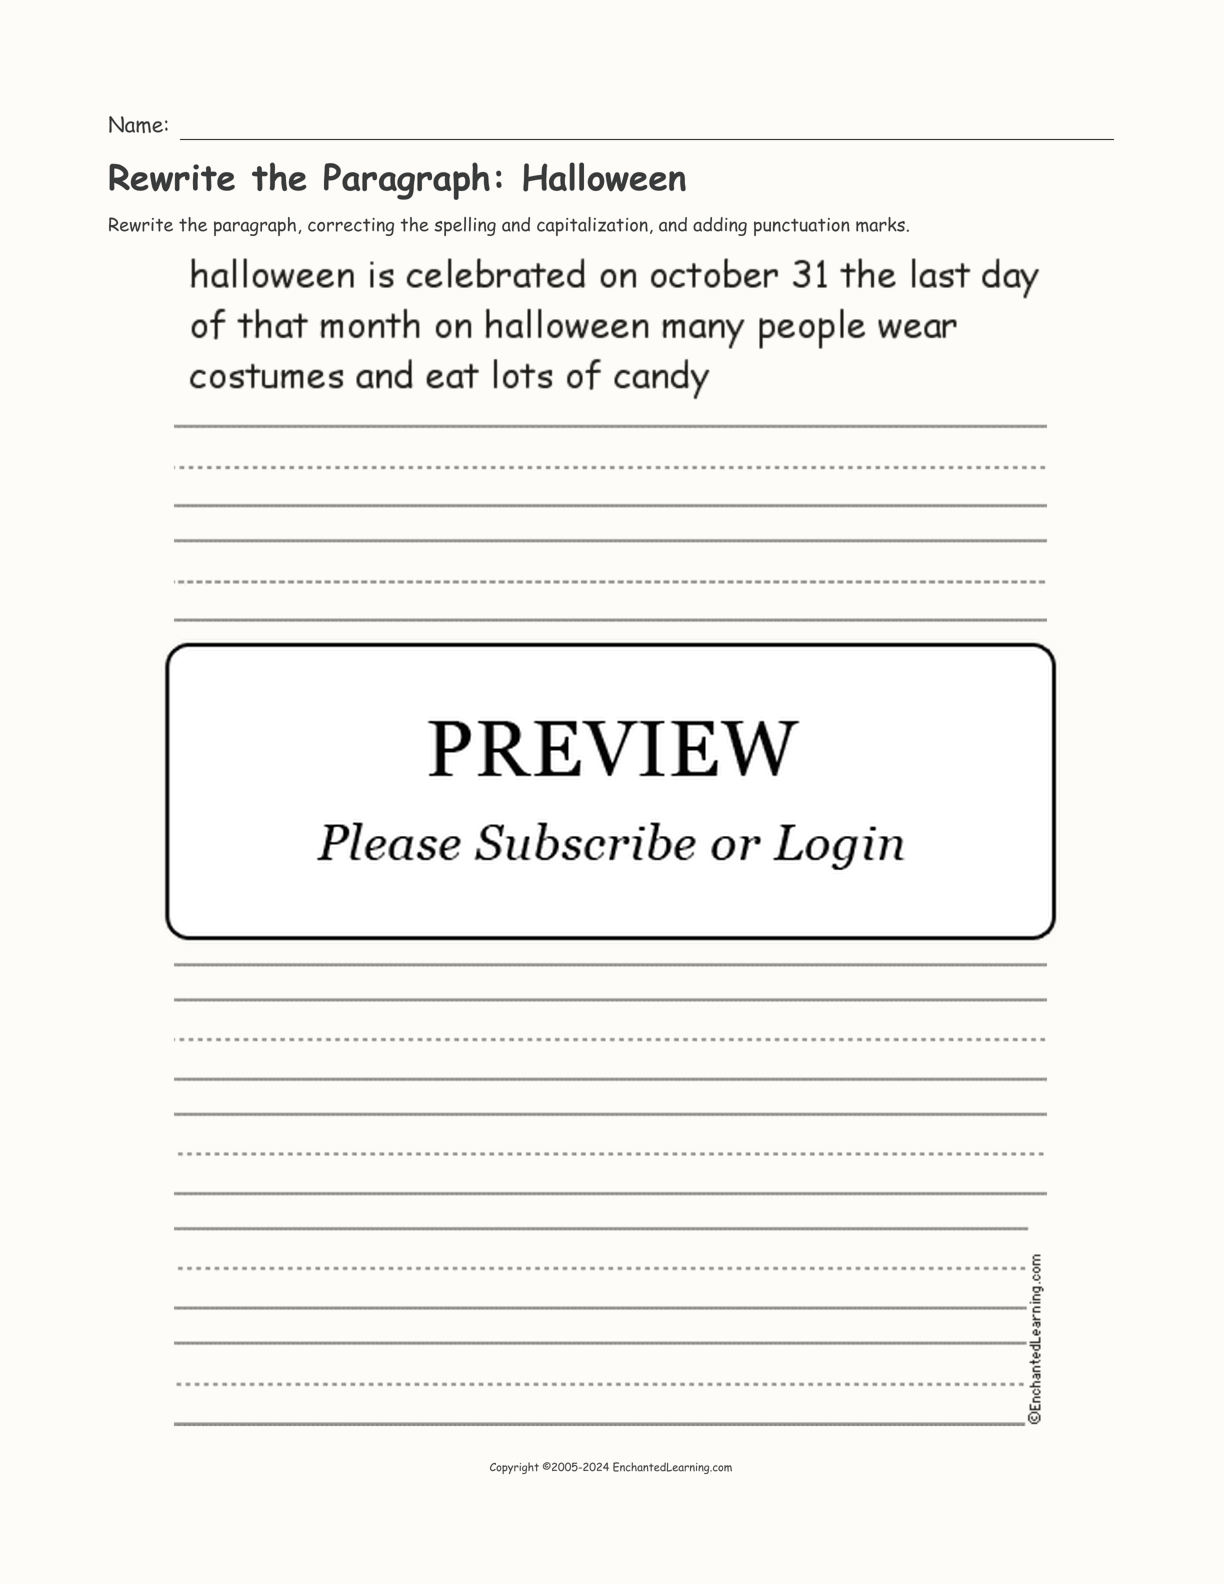 Rewrite the Paragraph: Halloween interactive worksheet page 1